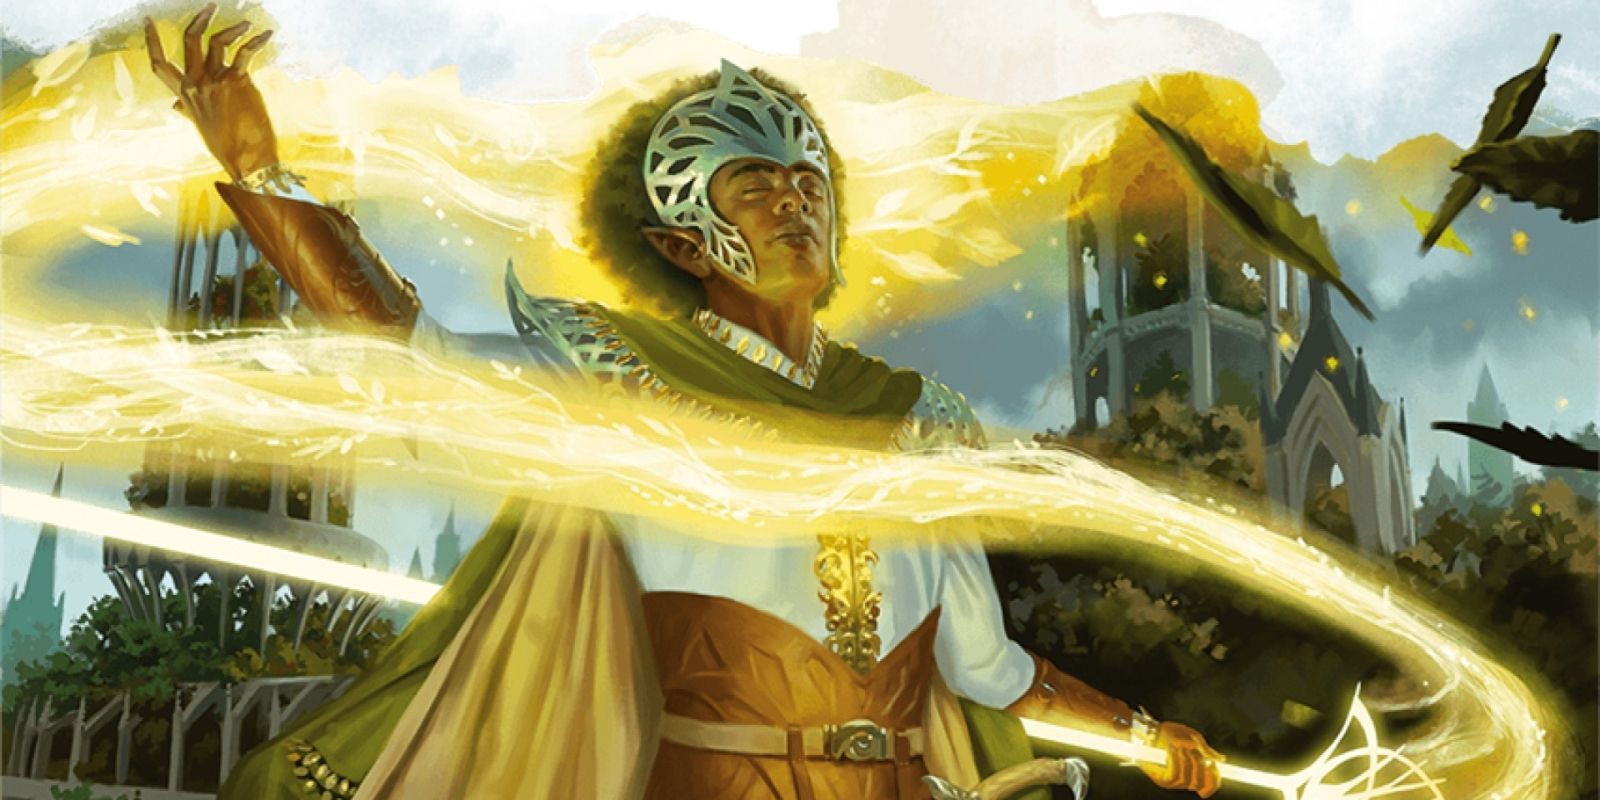 A Cleric casting a light spell in DnD